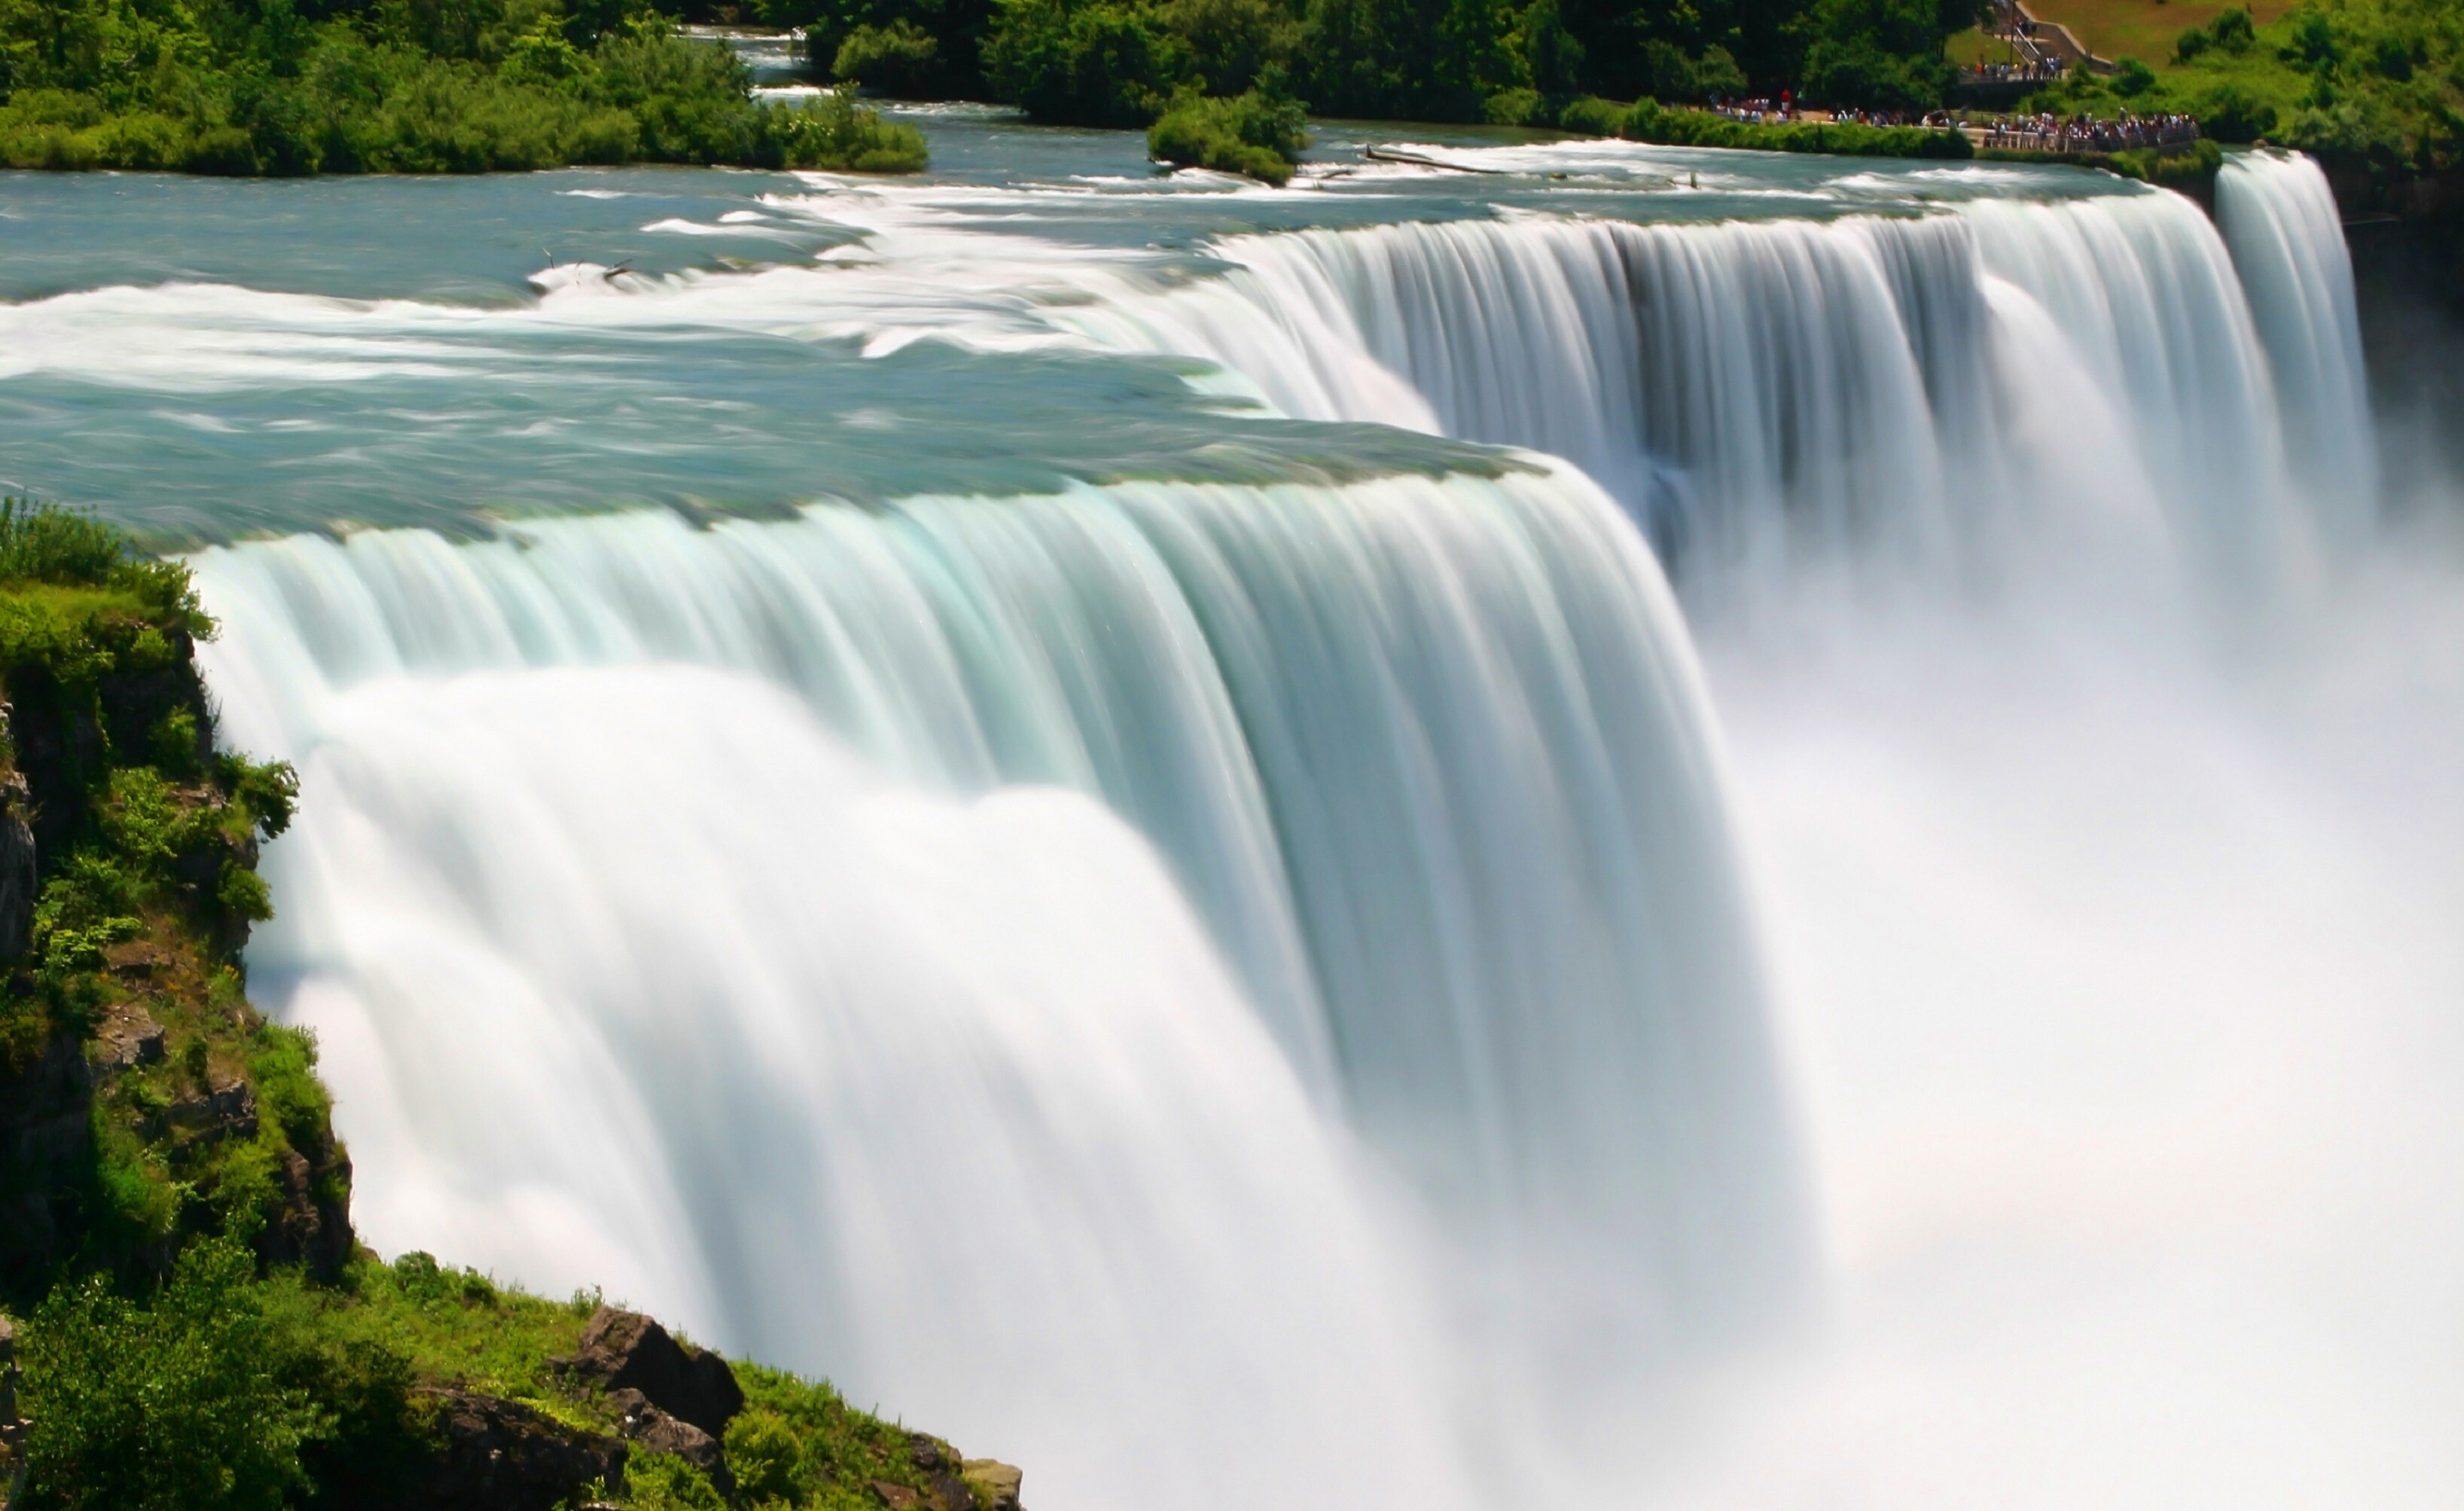 Niagara Falls: The world's greatest waterfall by volume at 2832 m3, Fluvial landforms of streams. 3280x2010 HD Wallpaper.